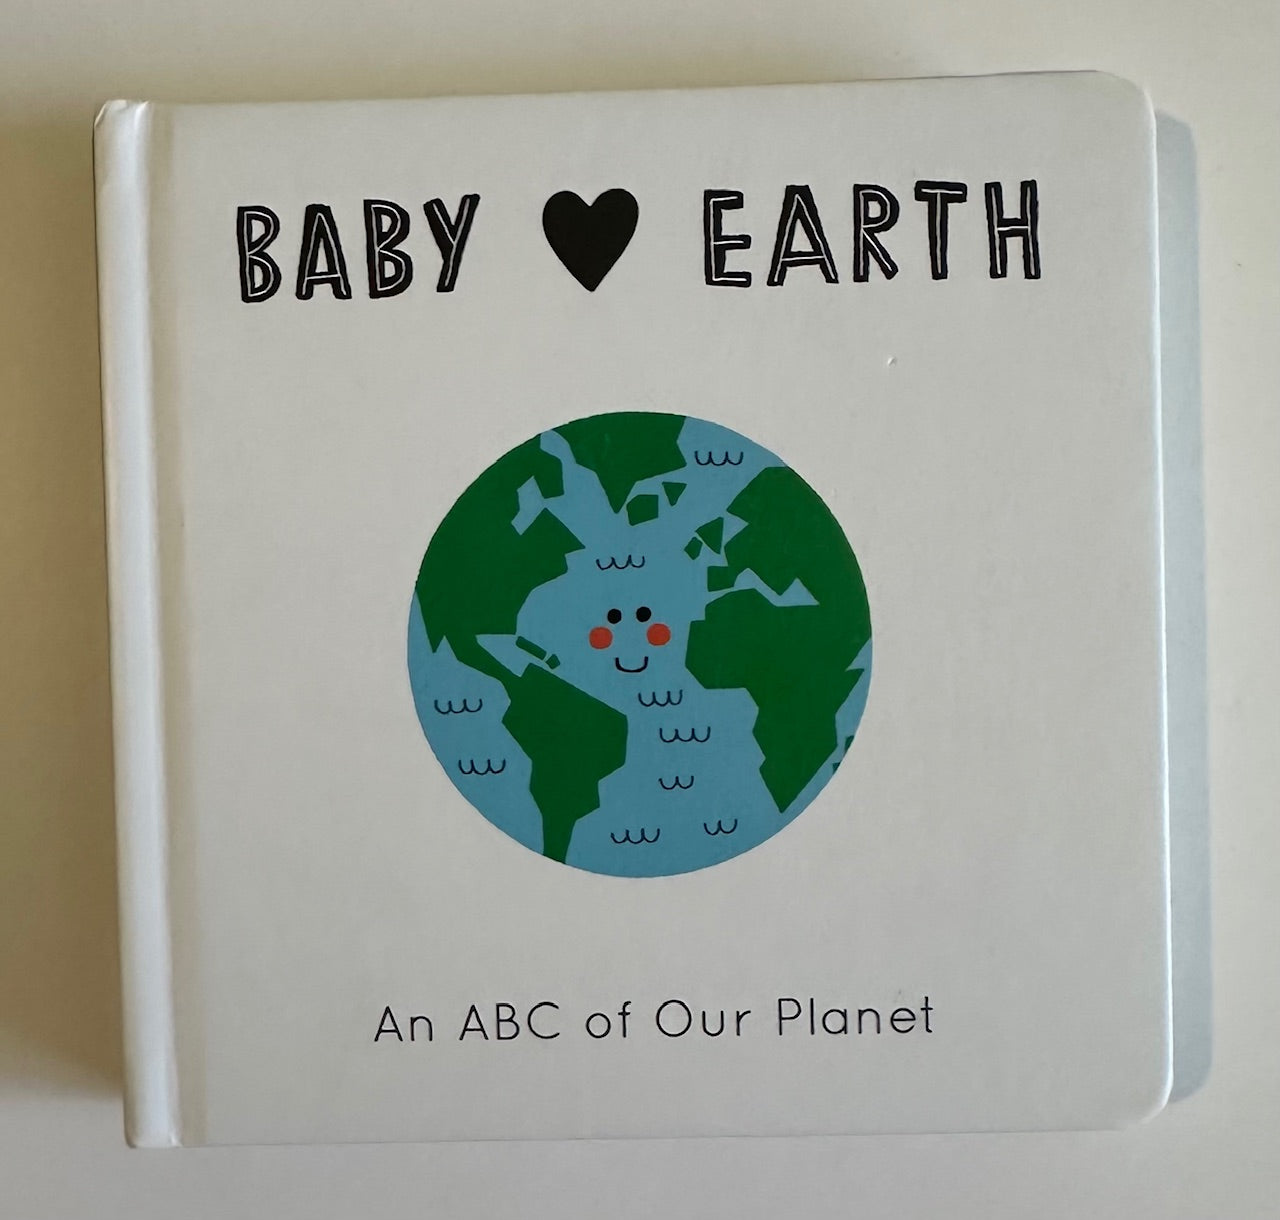 "Baby Earth: An ABC of Our Planet"